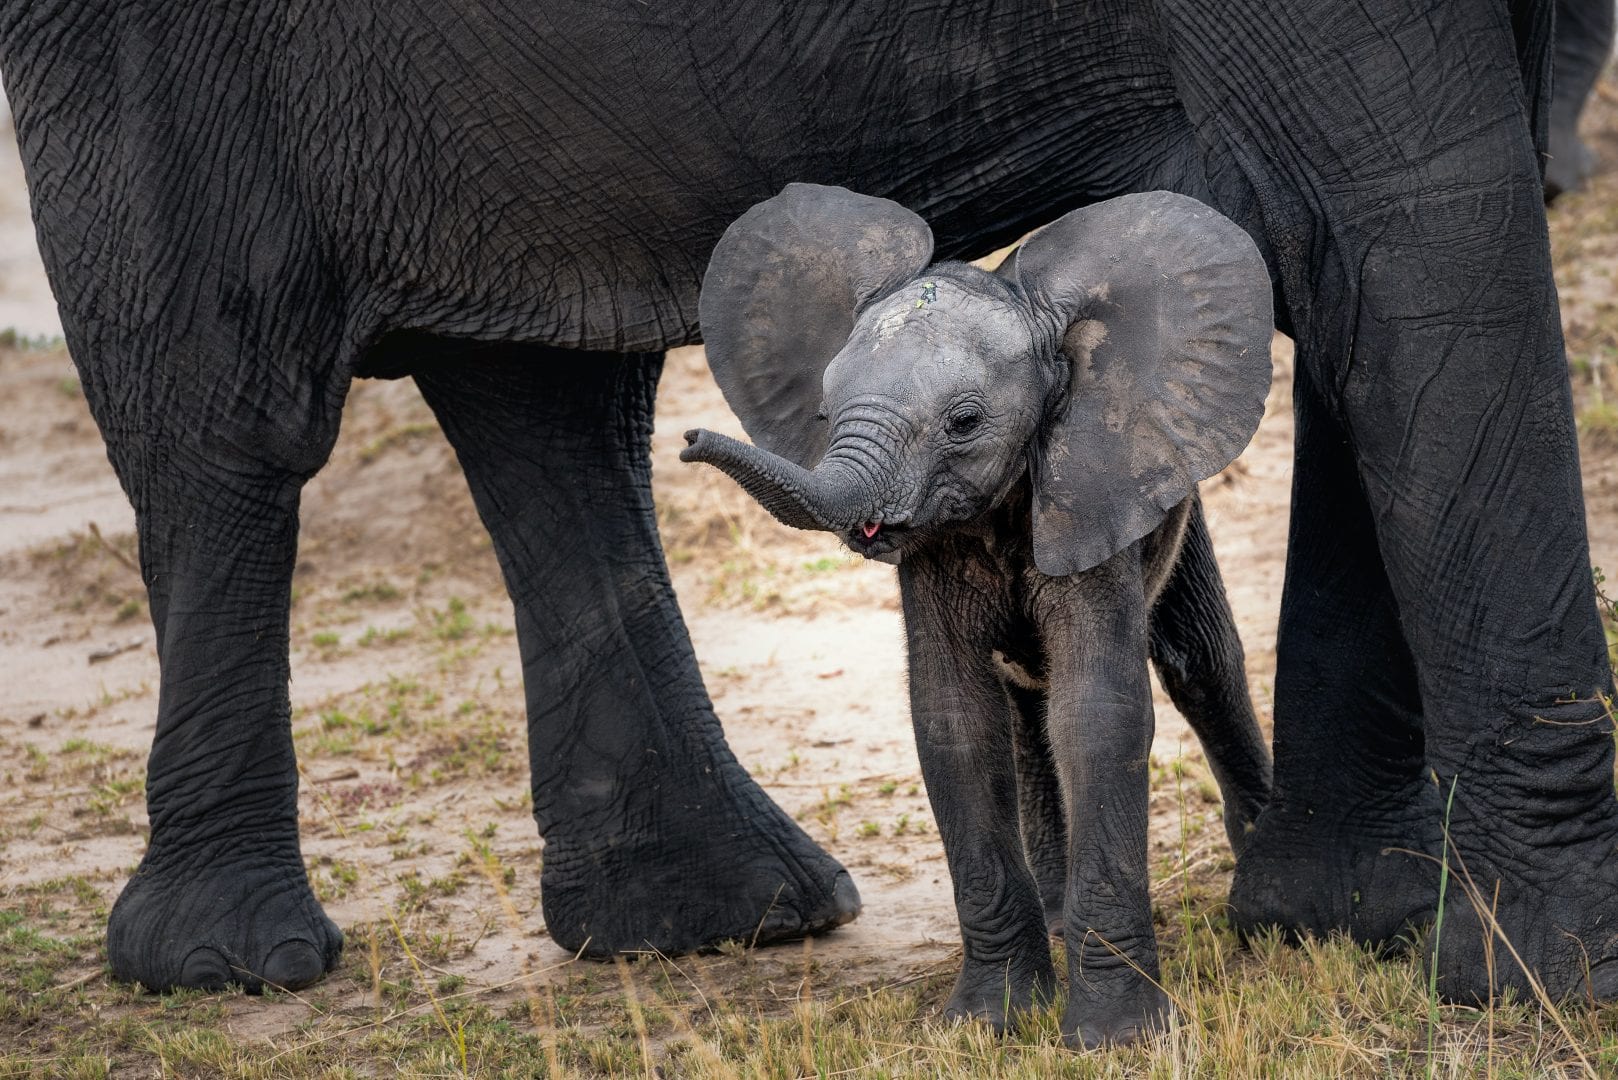 a baby elephant standing under the legs of it's parent